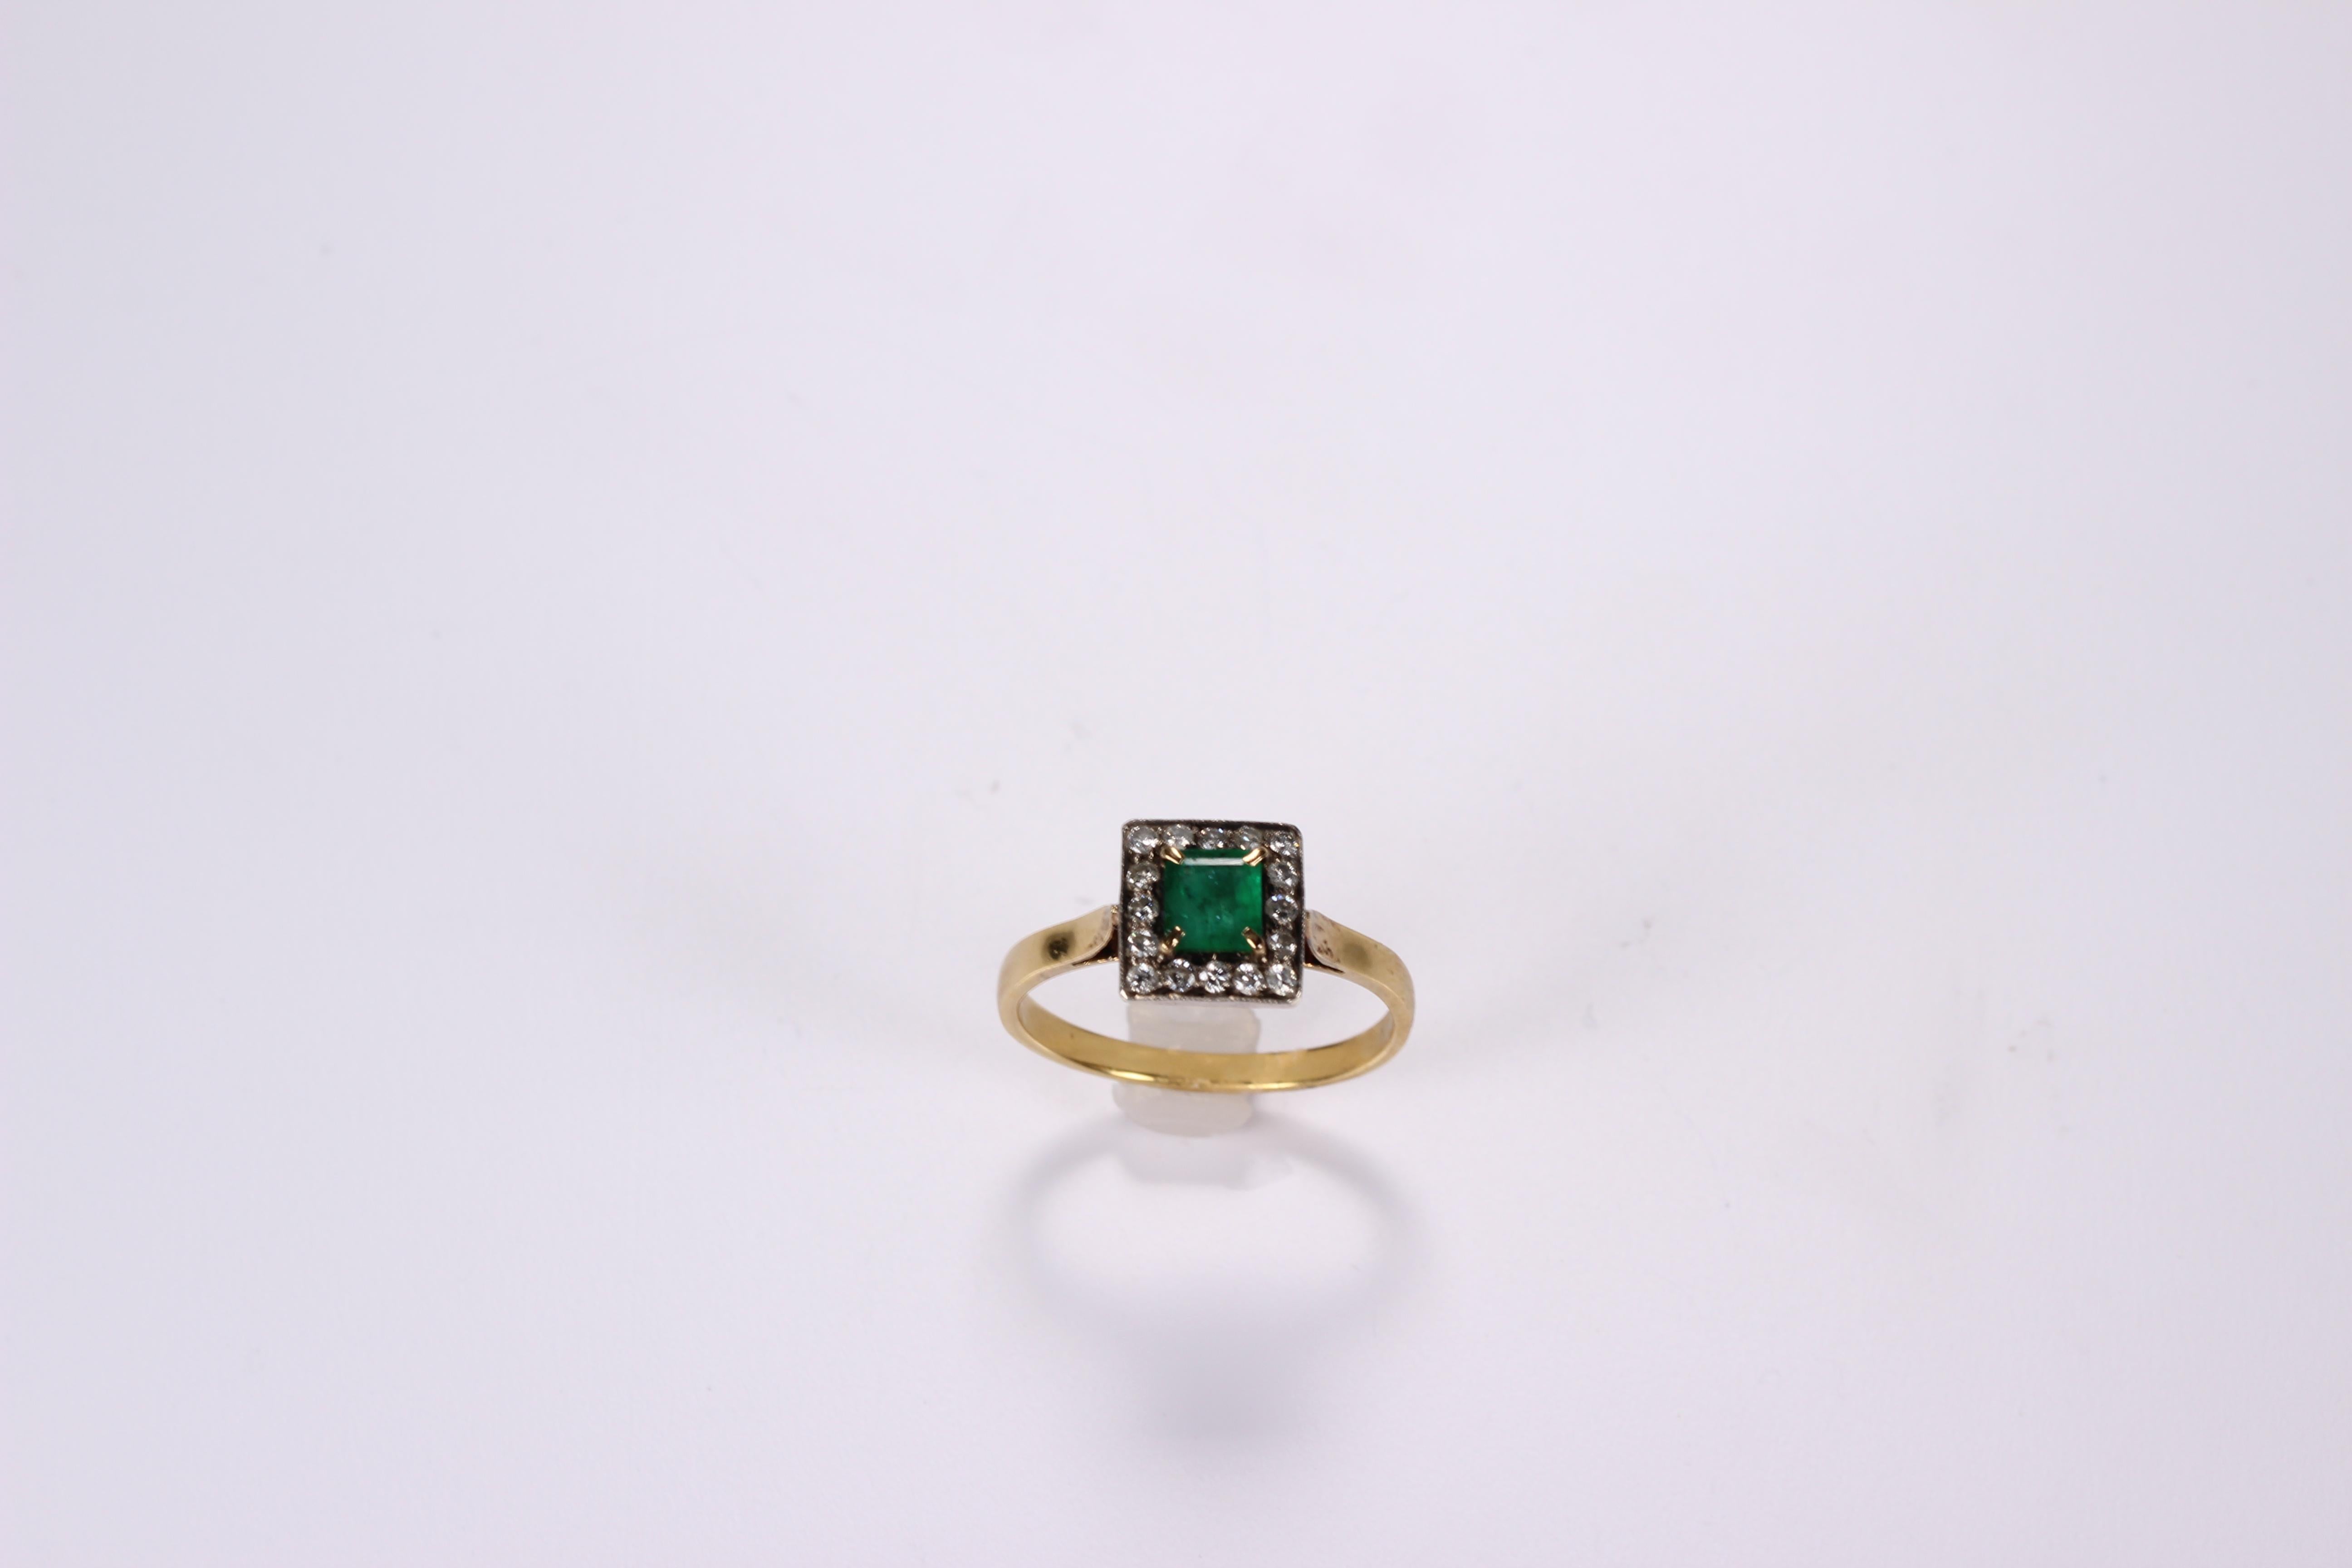 Square Cut Emerald Ring 18K Yellow Gold with Diamonds